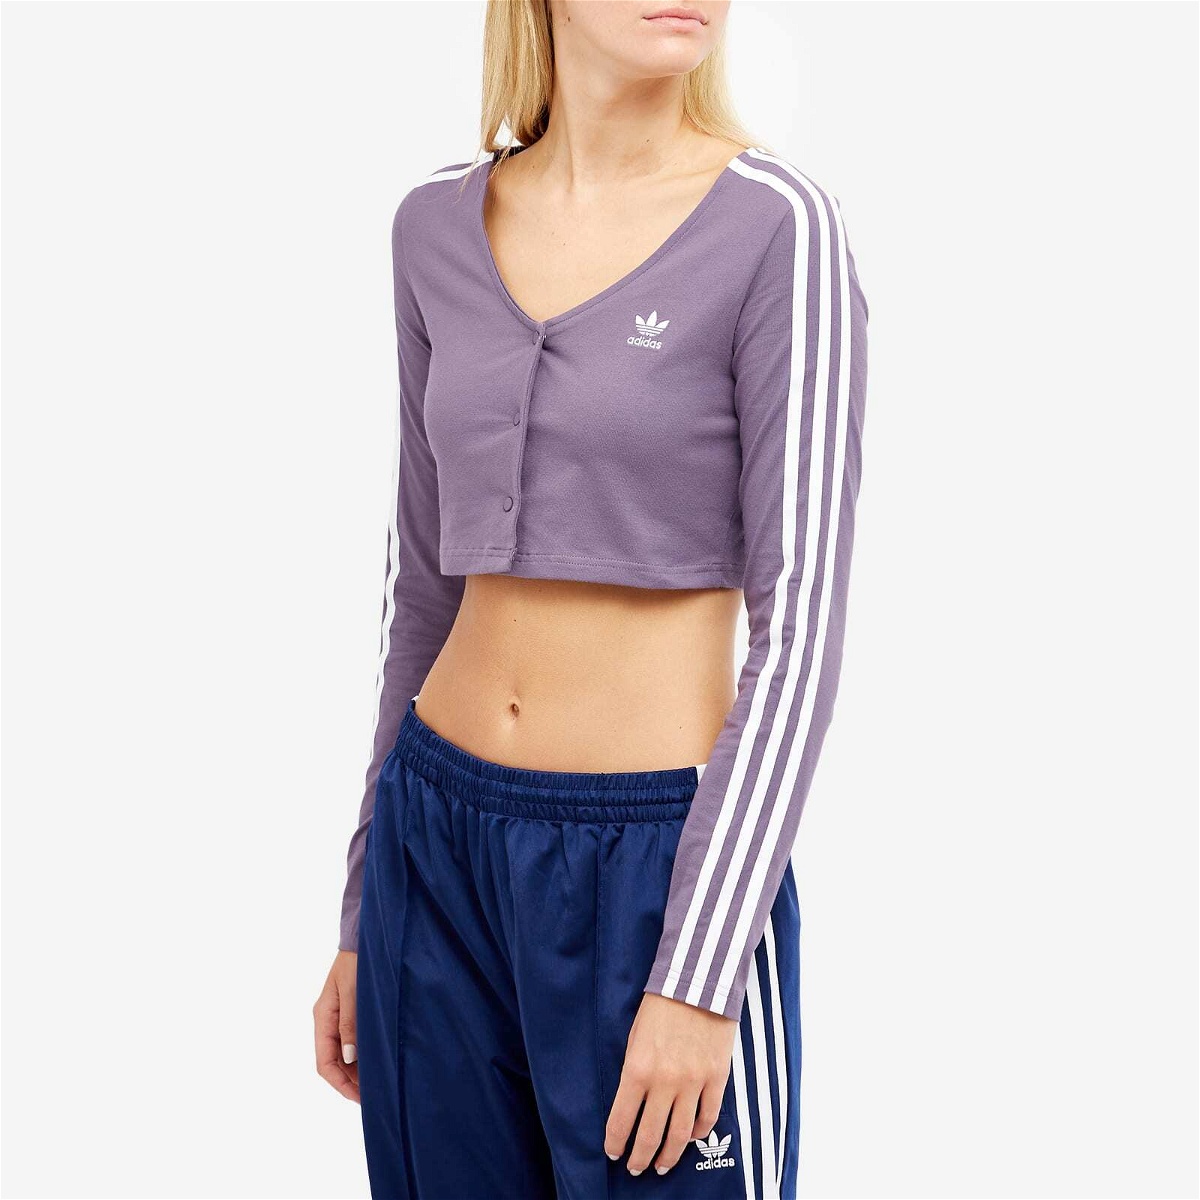 Shadow adidas in Violet Long Adidas Sleeve T-Shirt Women\'s Button